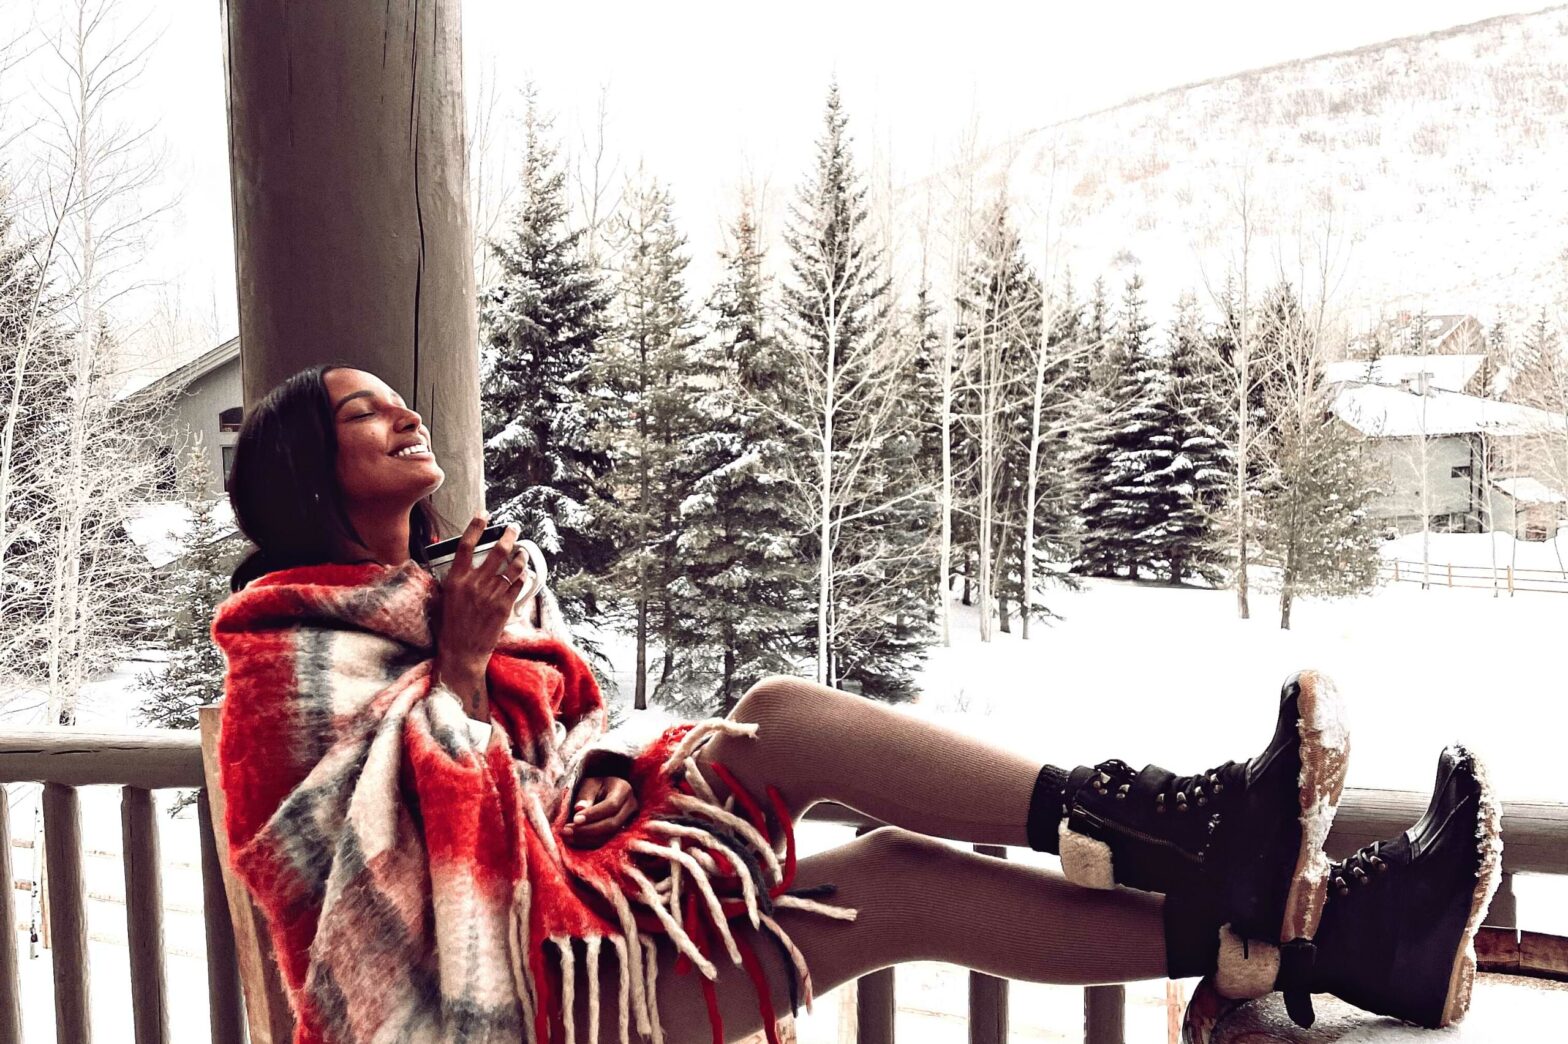 model, jasmine tookes, sits on porch outside wrapped in a blanket and holding a coffee mug with snow covered foliage in the background